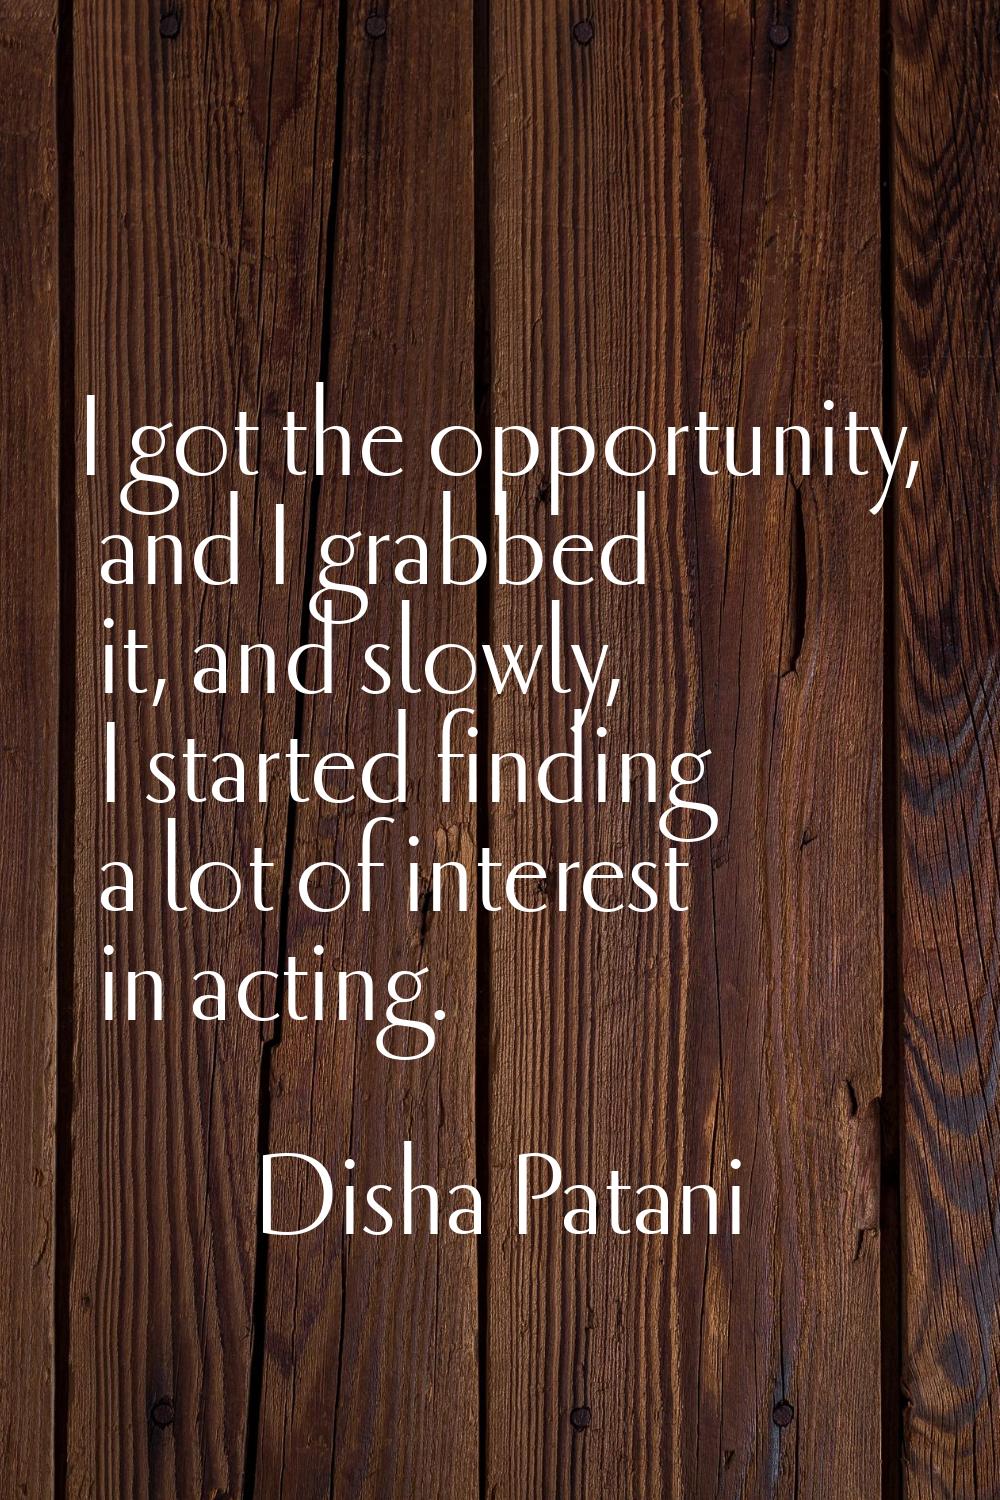 I got the opportunity, and I grabbed it, and slowly, I started finding a lot of interest in acting.